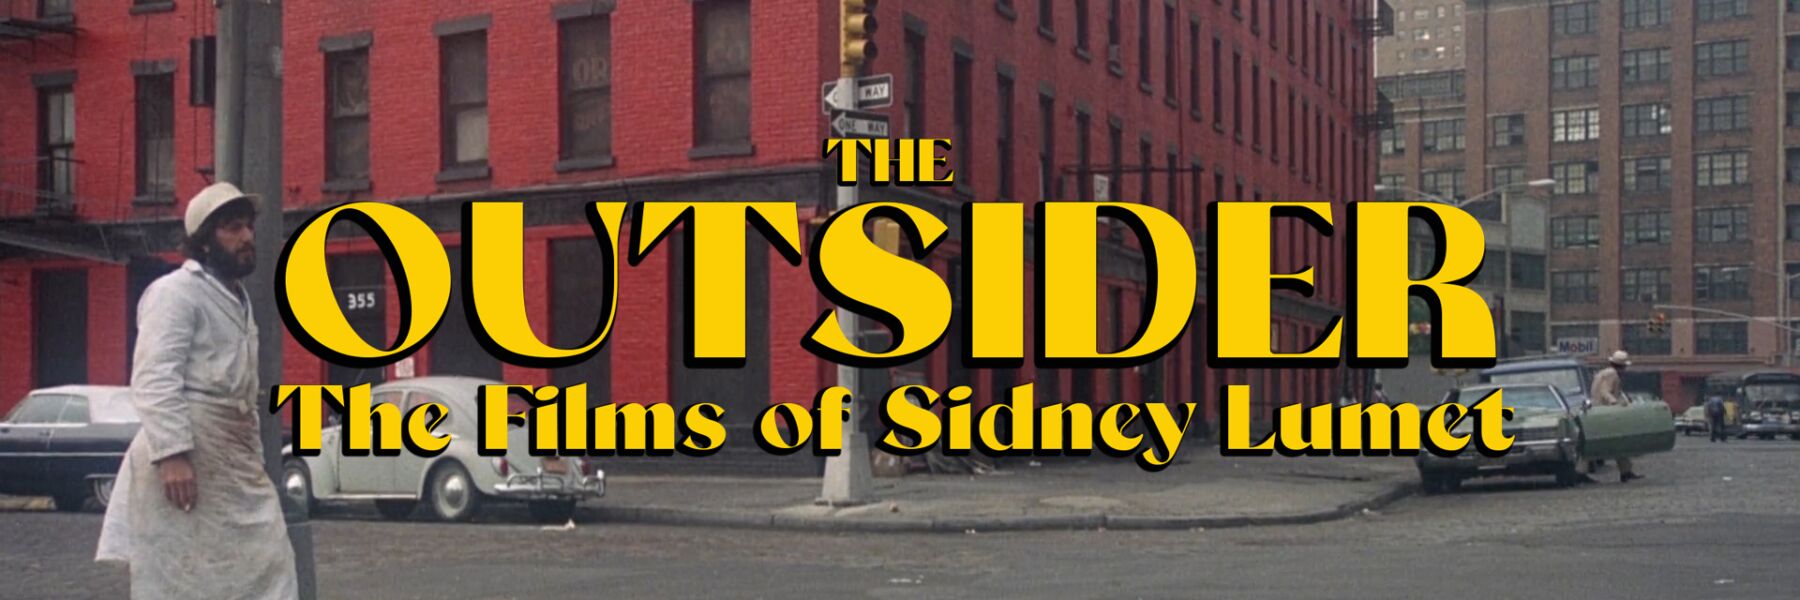 Poster: The Outsider: The Films of Sidney Lumet